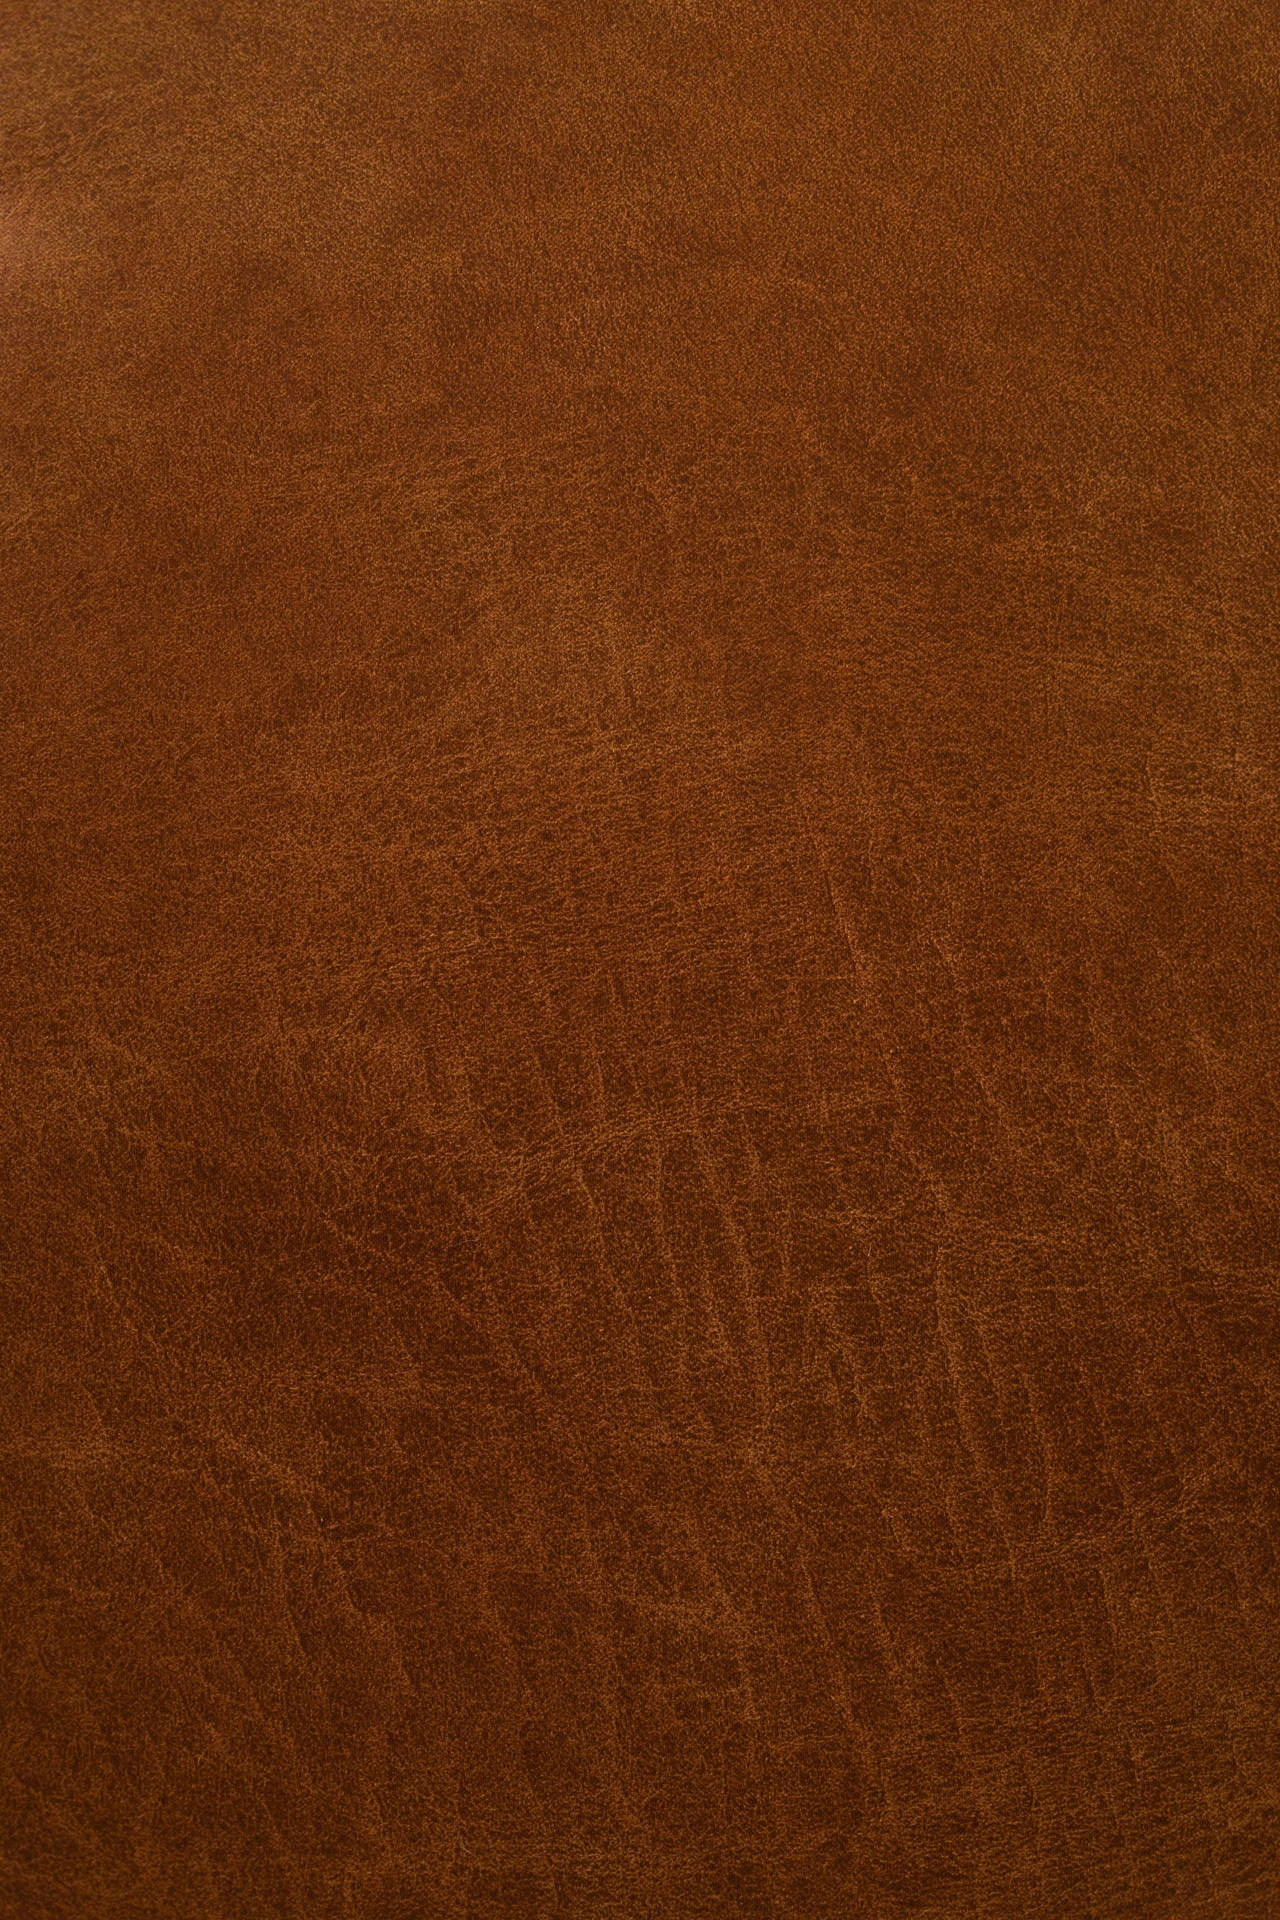 Brown 3072X4608 Wallpaper and Background Image